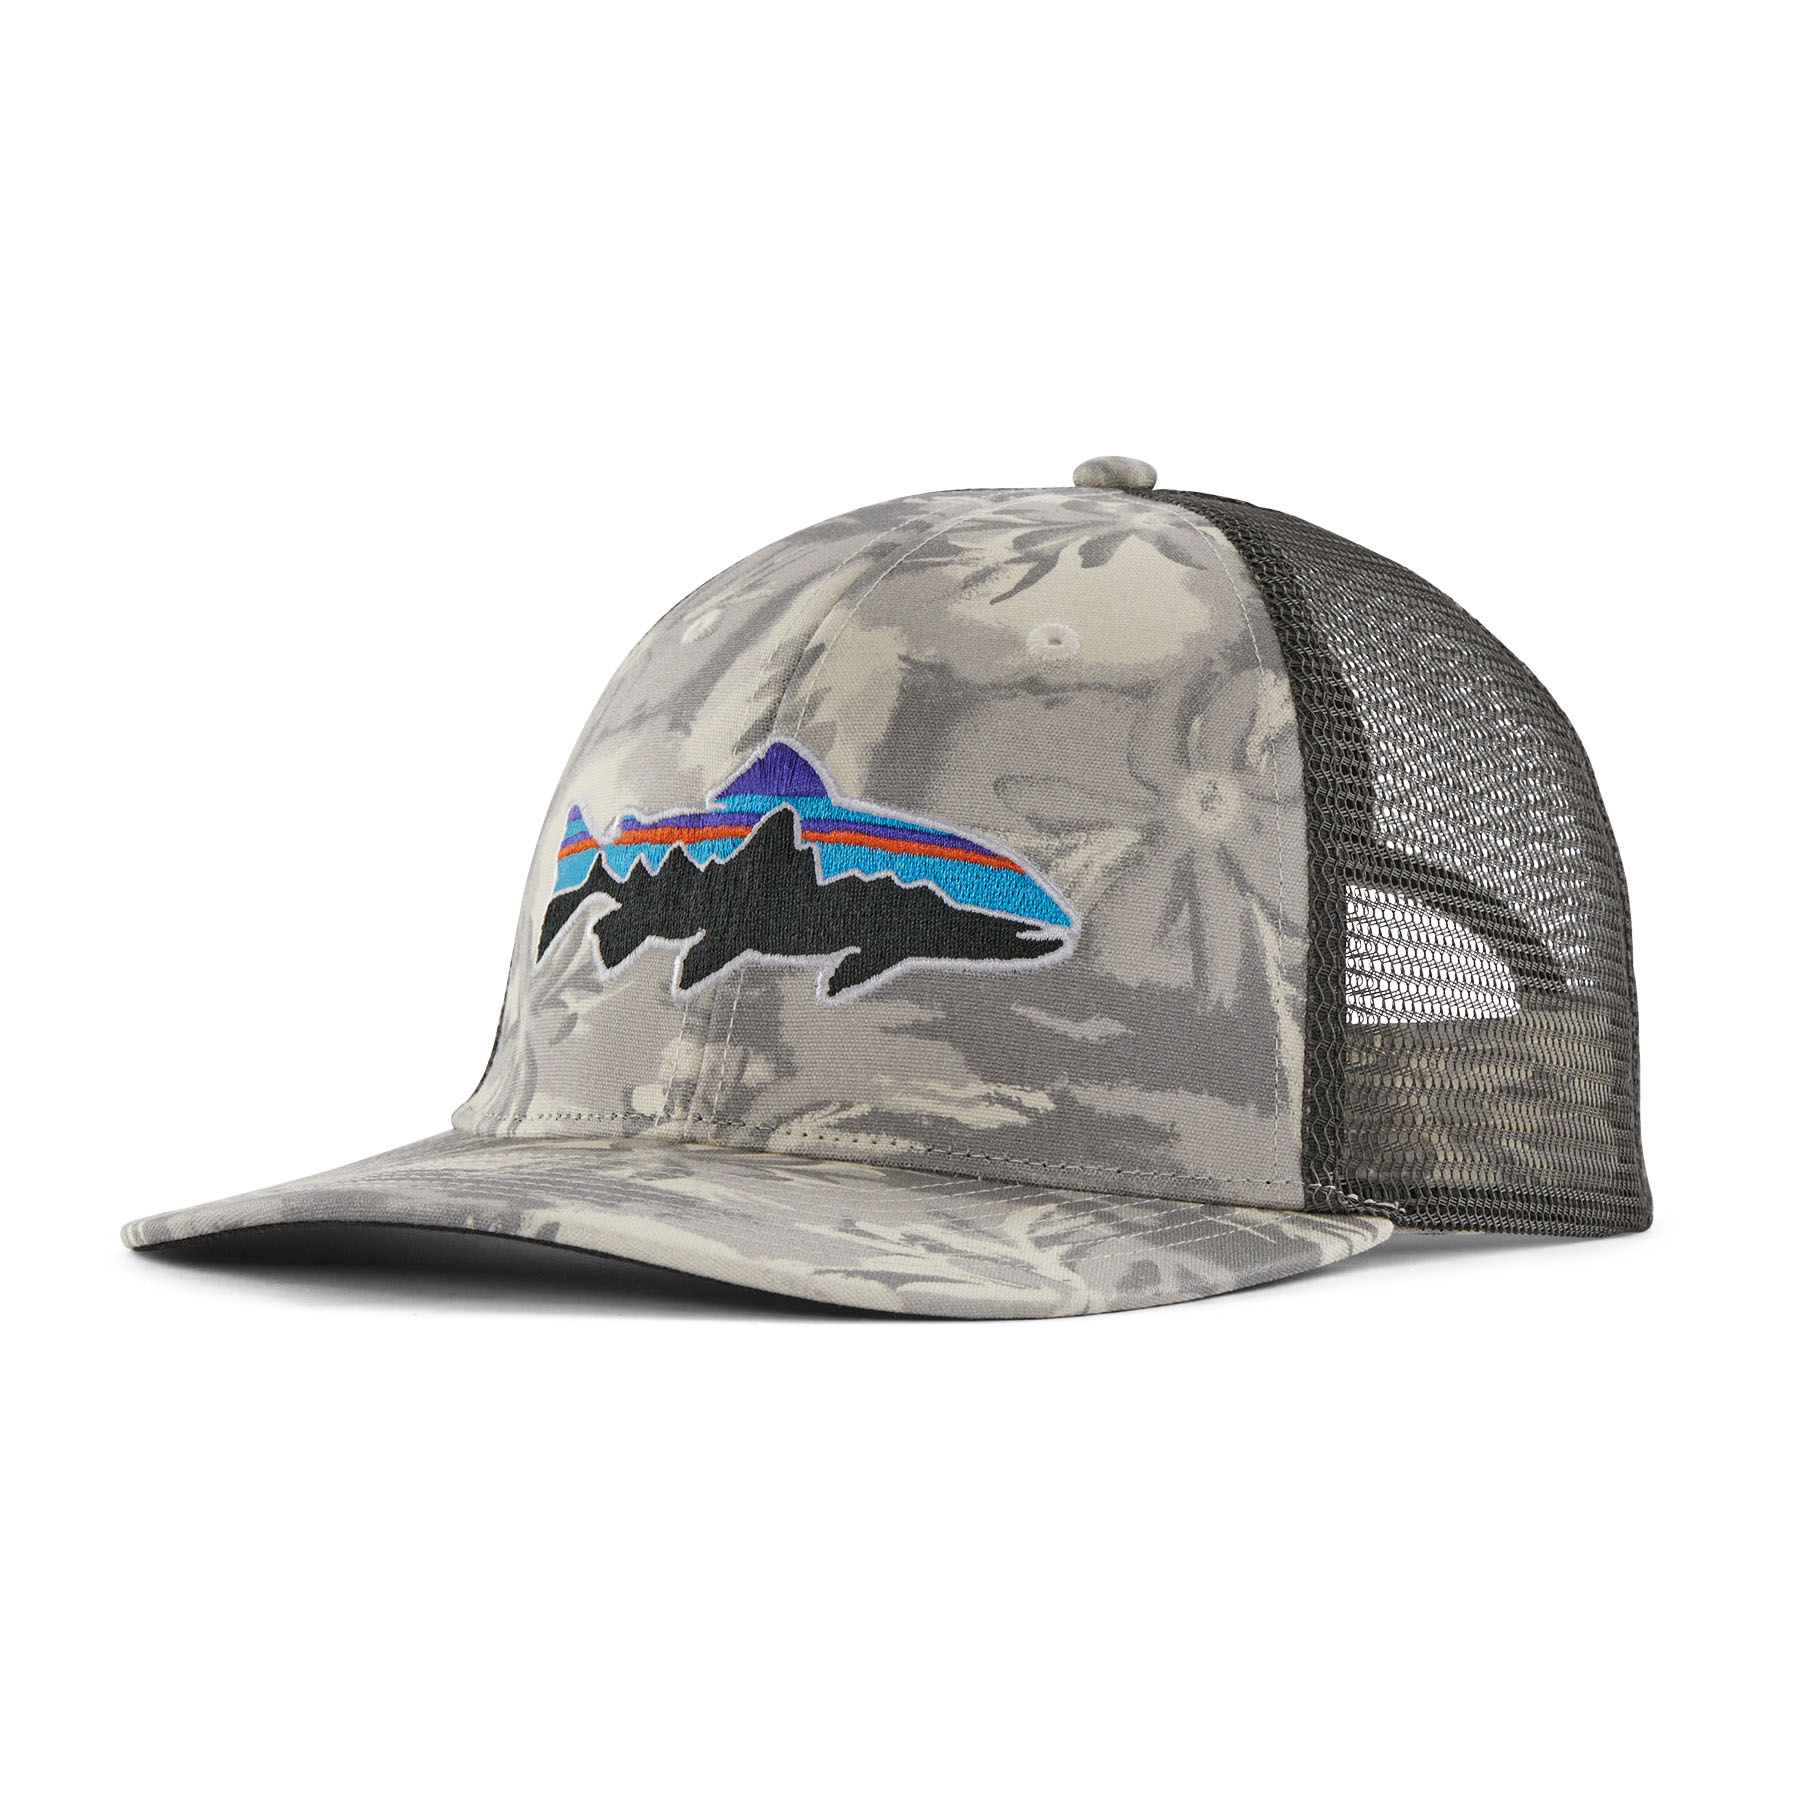 Fitz Roy Trout Trucker Hat (Cliffs and Waves: Natural)